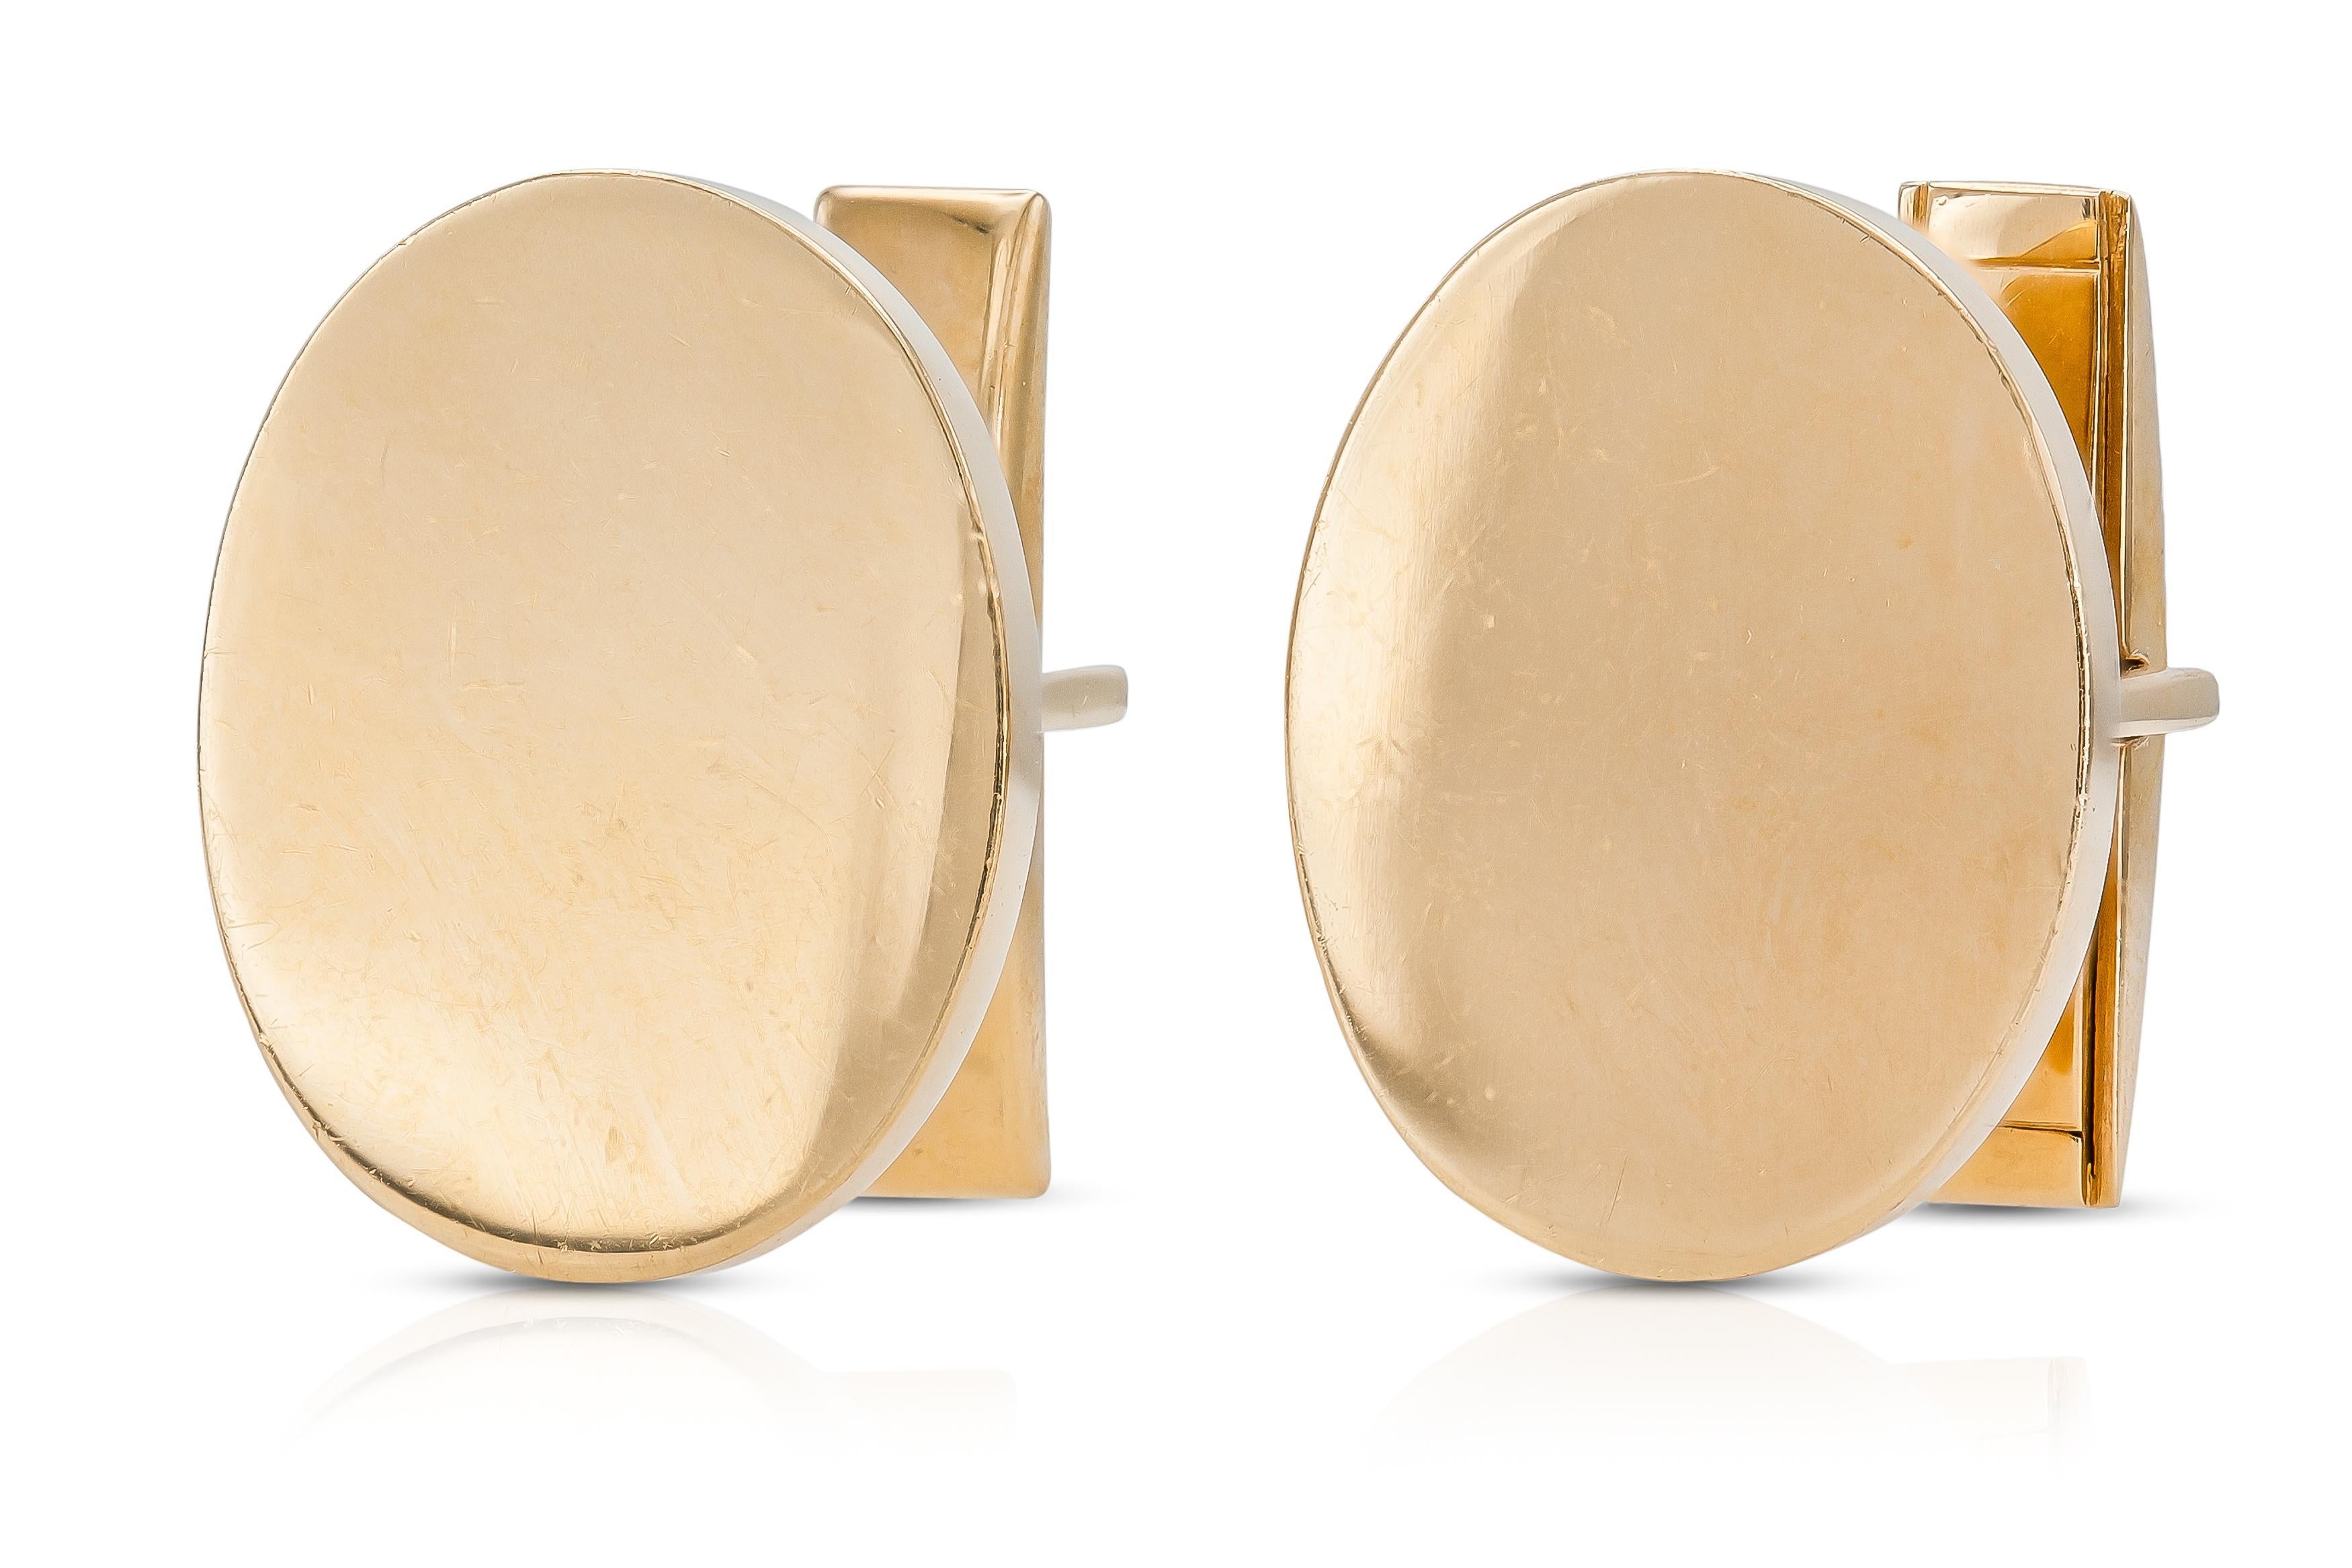 Finely crafted in 14k yellow gold.
Circa 1960s